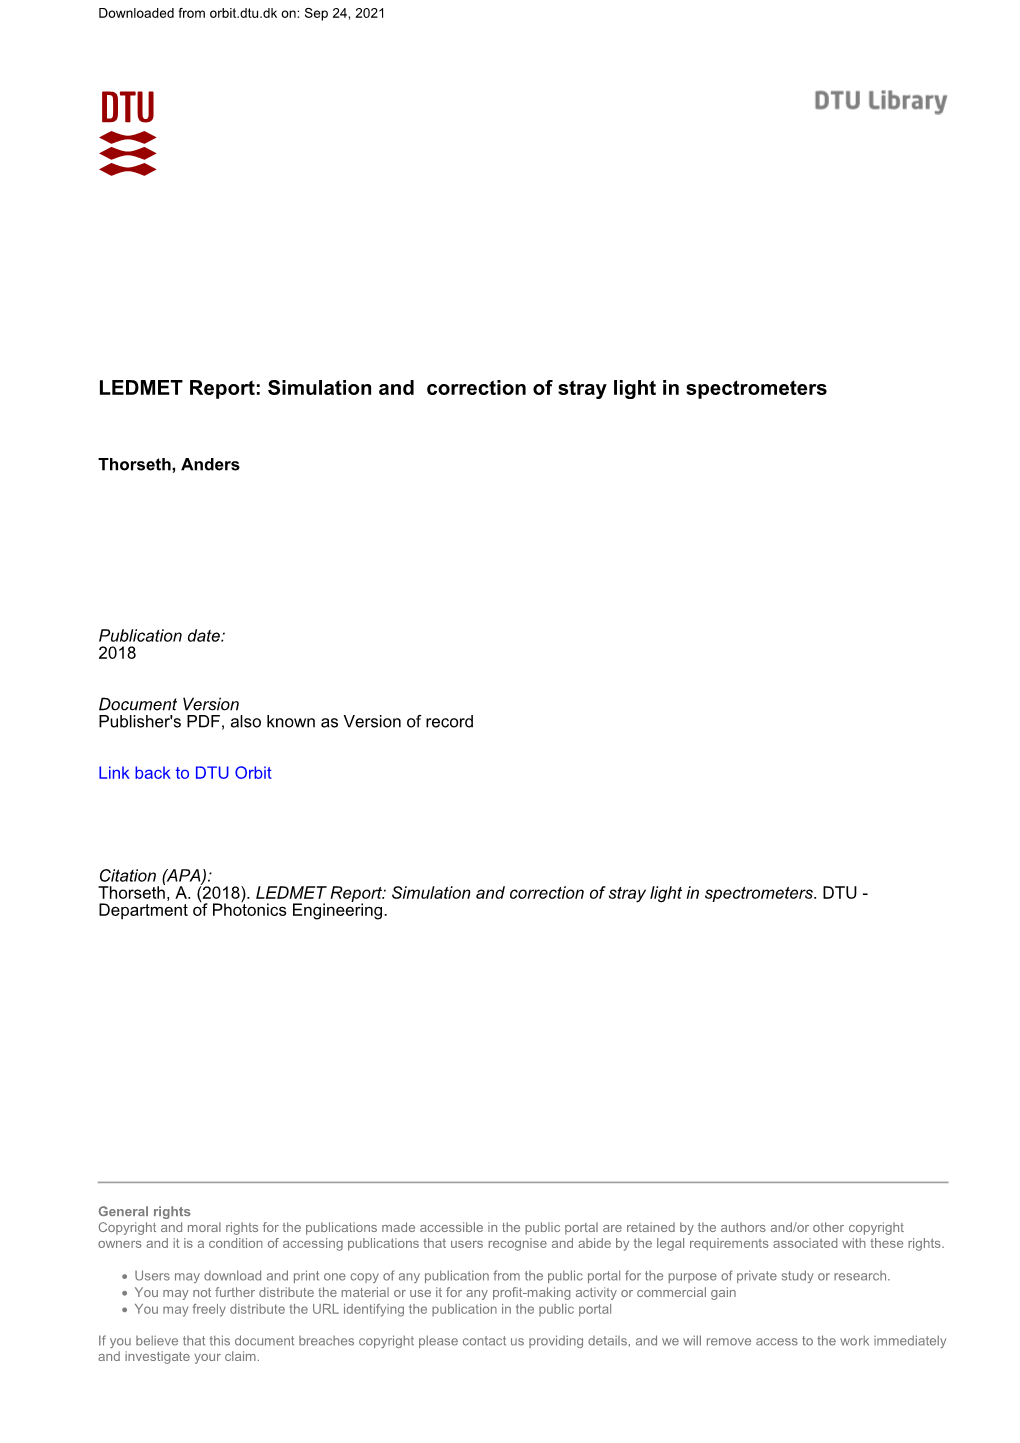 LEDMET Report: Simulation and Correction of Stray Light in Spectrometers